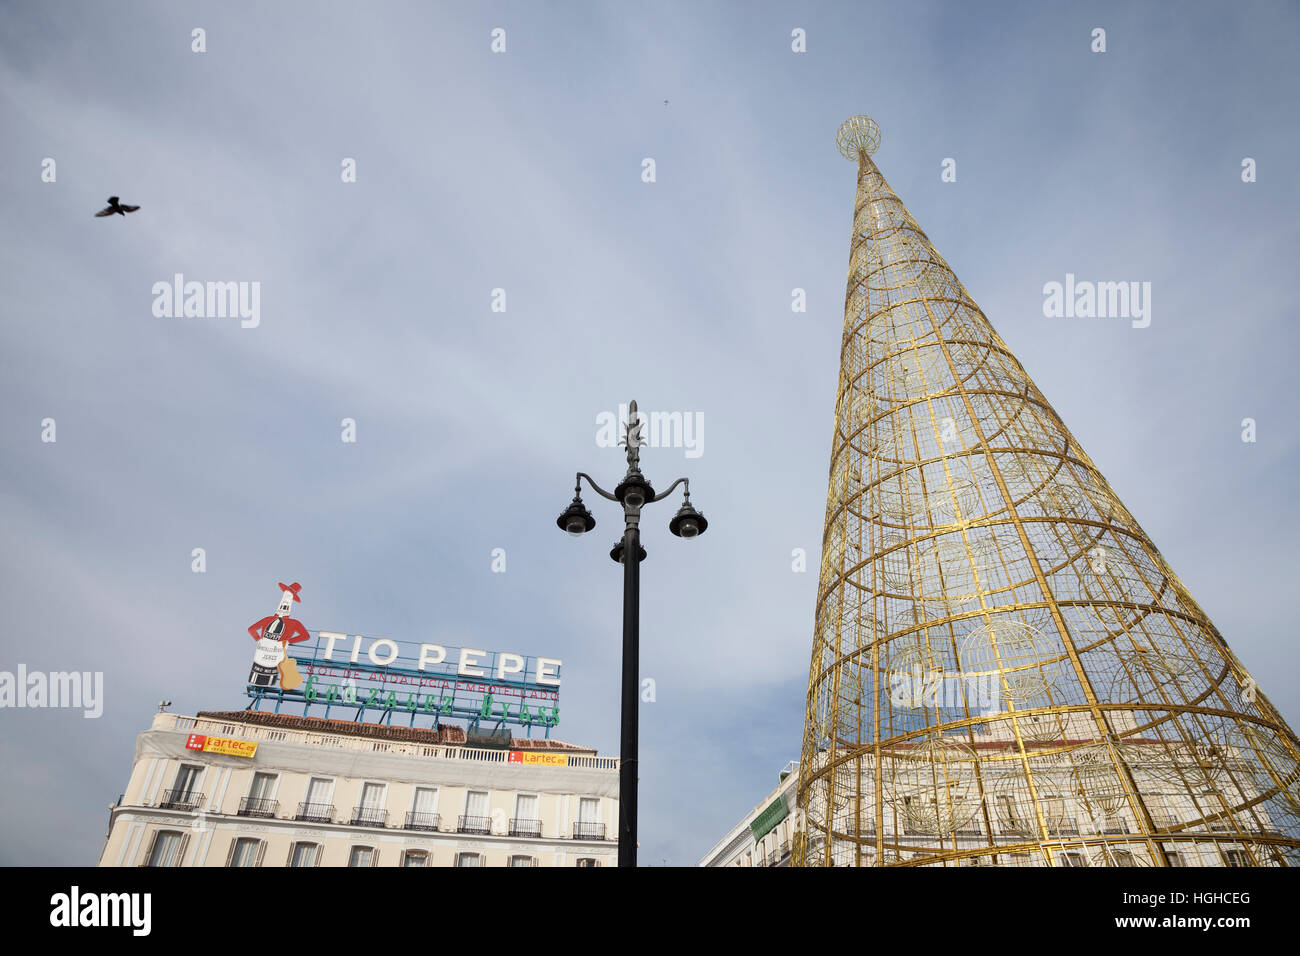 Madrid, Spain: Modern Christmas tree with the landmark Tío Pepe sign in the Puerta del Sol. Stock Photo